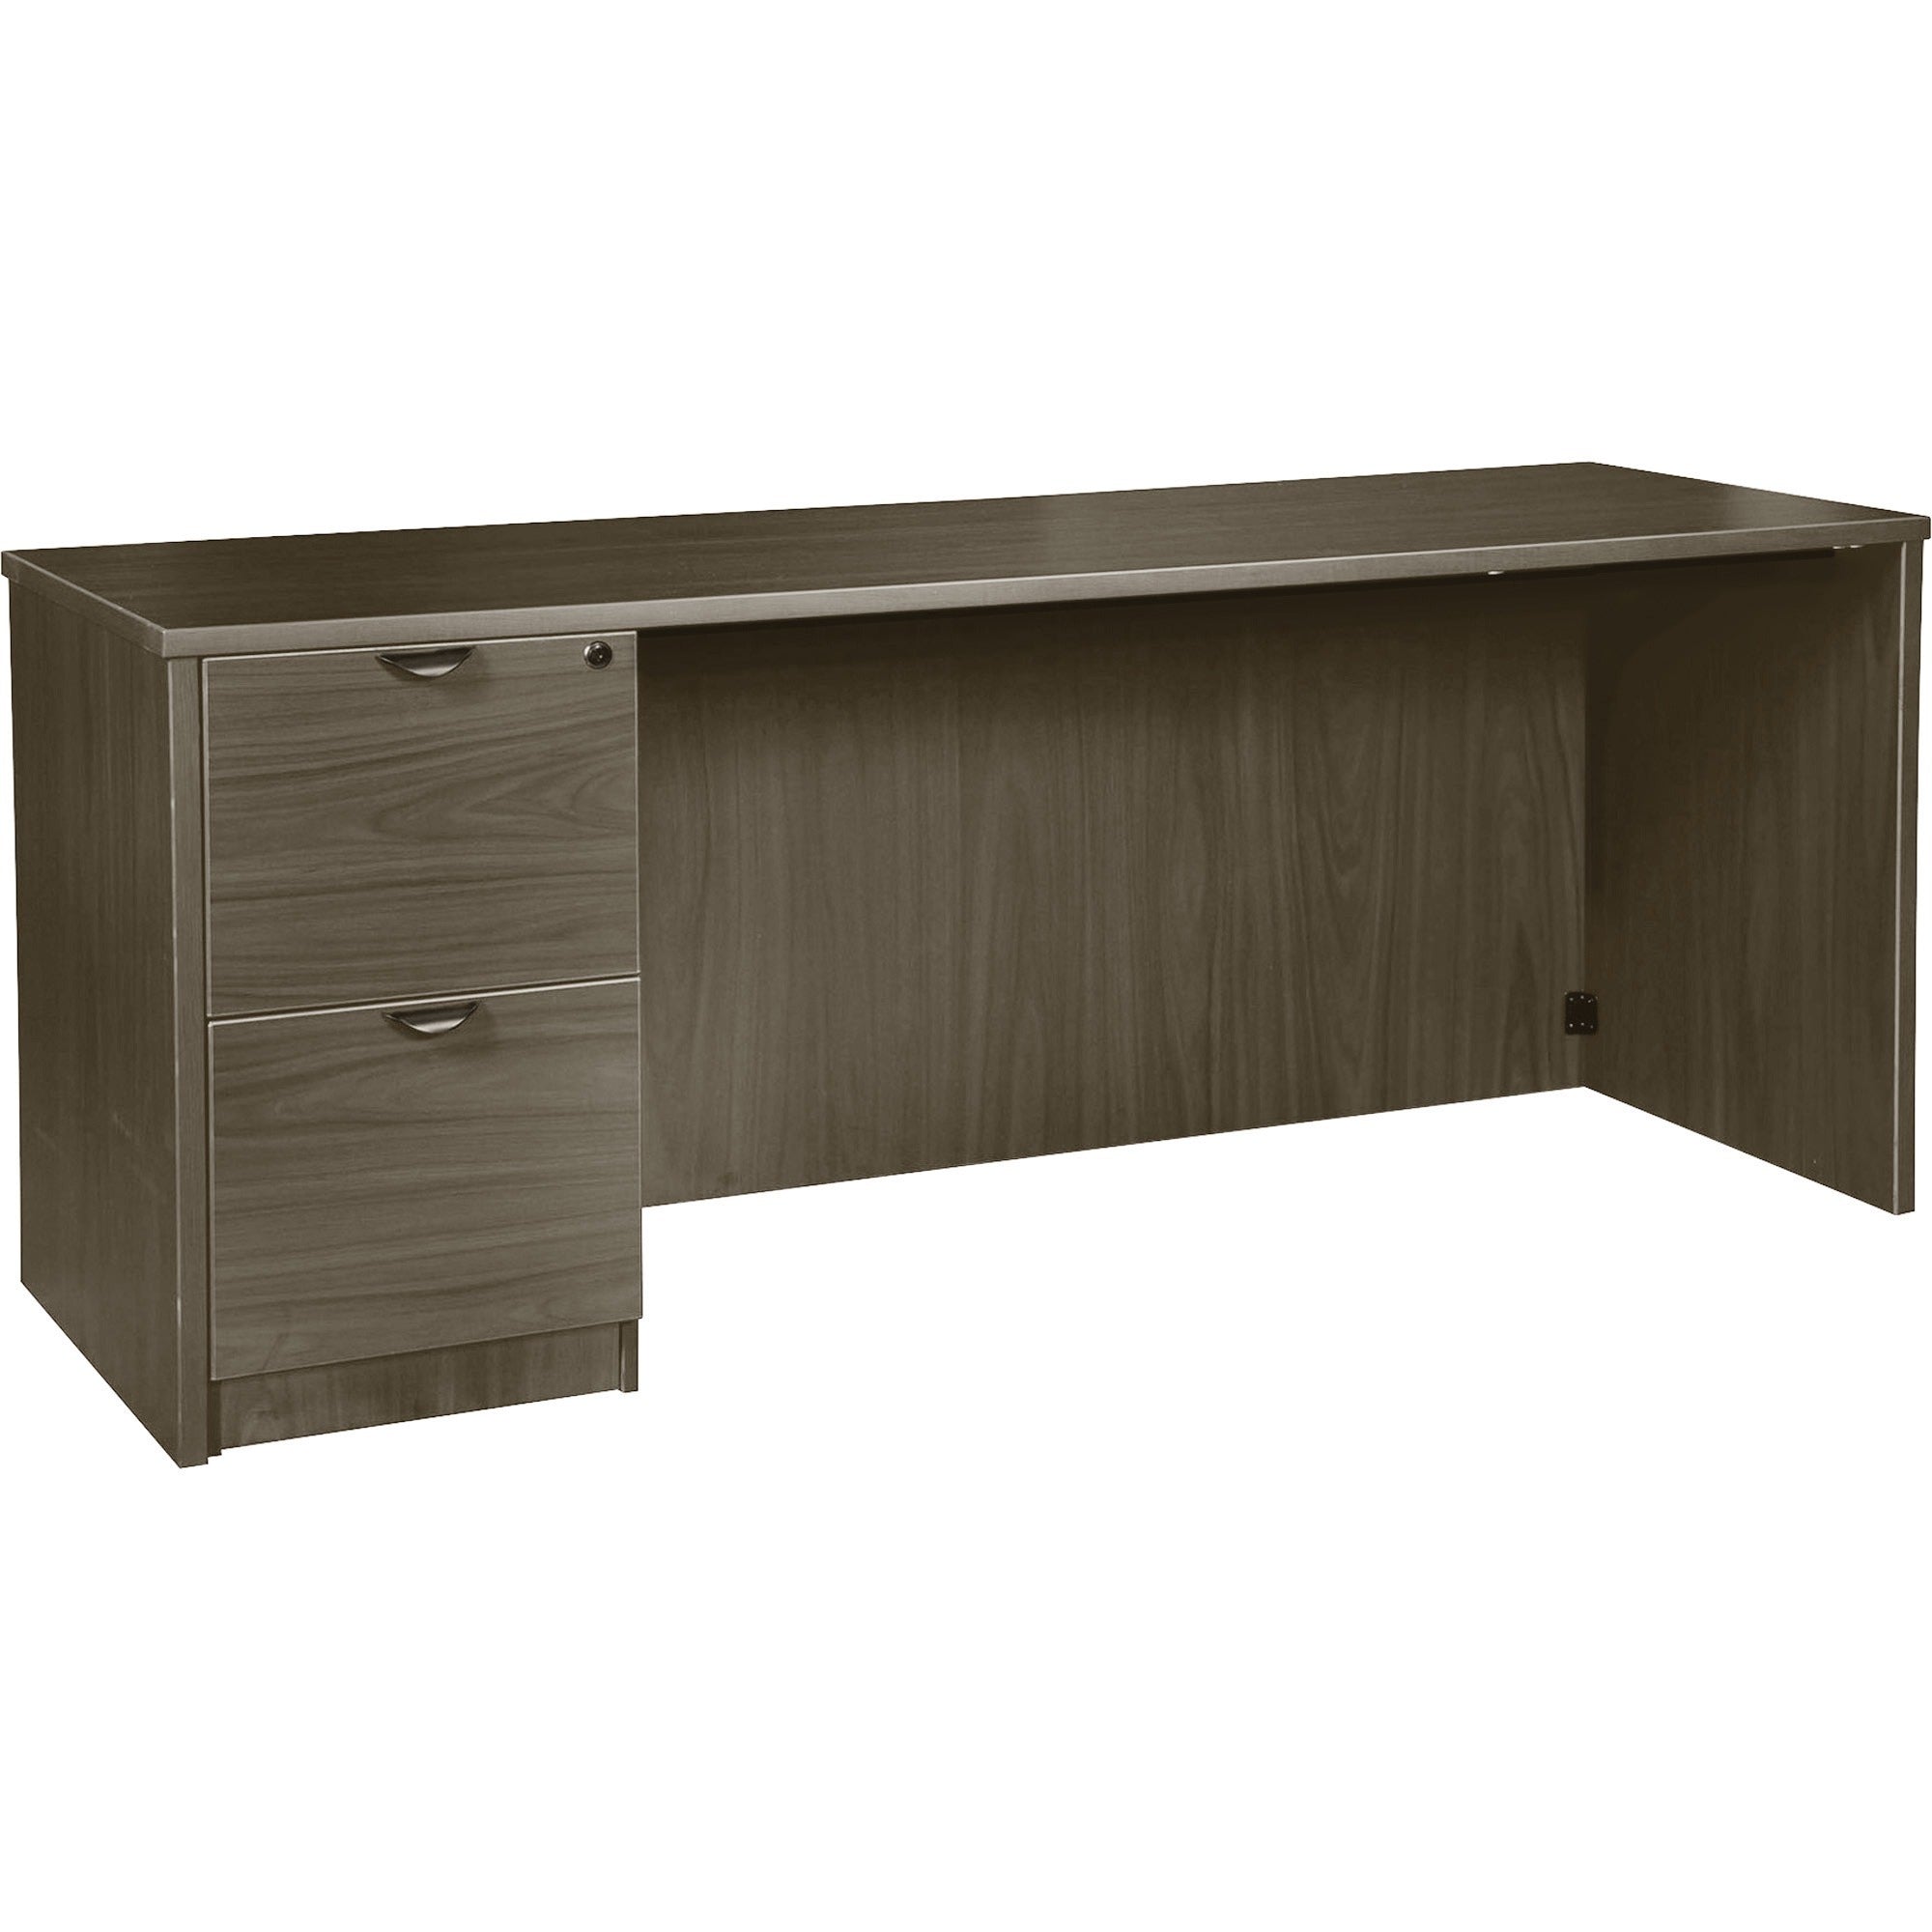 lorell-prominence-20-left-pedestal-credenza-66-x-2429--1-top-01-edge-2-x-file-drawers-single-pedestal-on-left-side-band-edge-material-particleboard-finish-thermofused-melamine-tfm_llrpc2466lge - 1